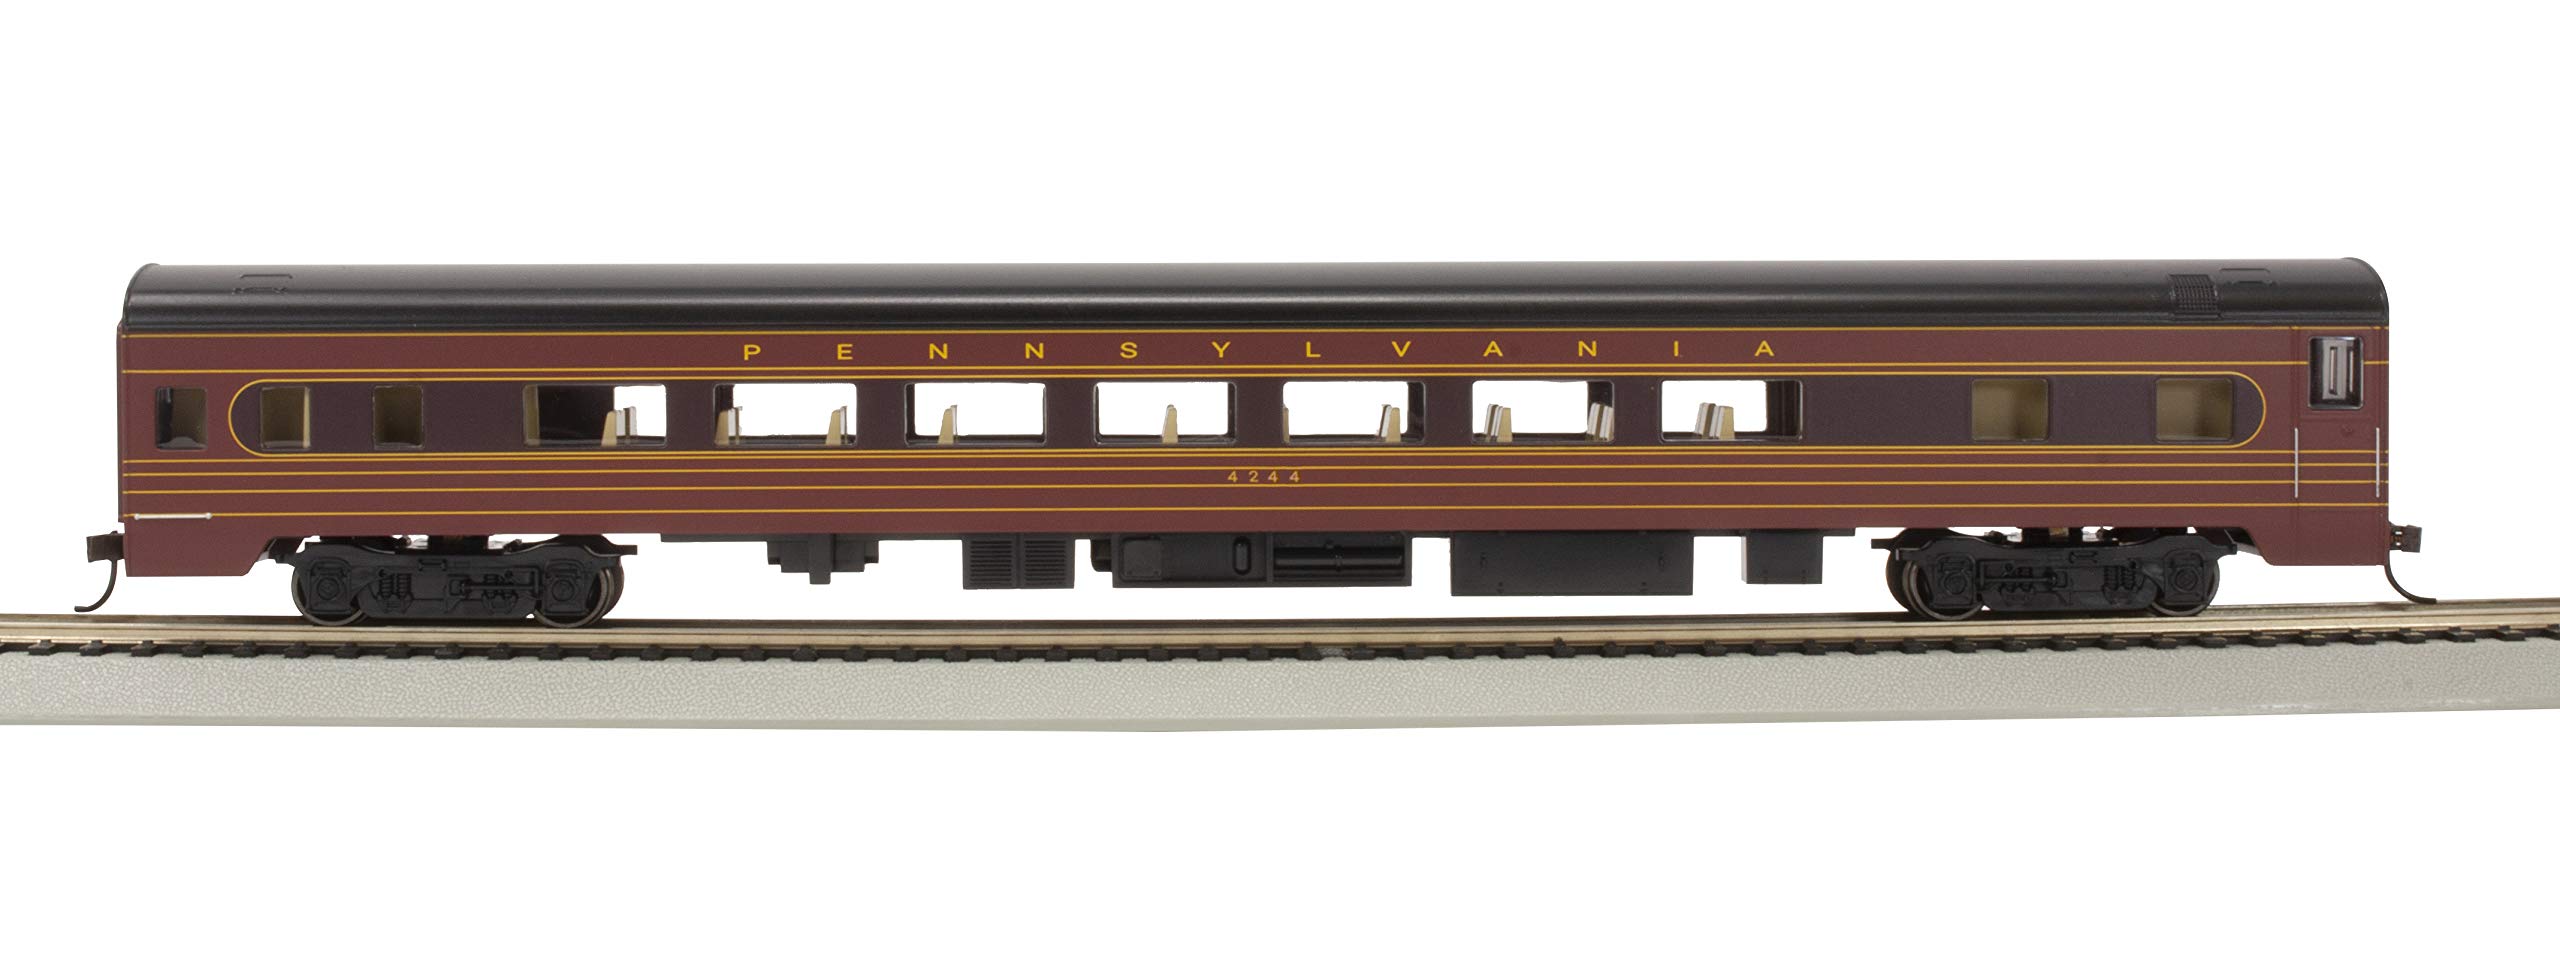 Bachmann Trains - 85' Smooth-Side Coach Car with Lighted Interior - PRR #4244 - Fleet of Modernism - HO Scale (14211),Silver